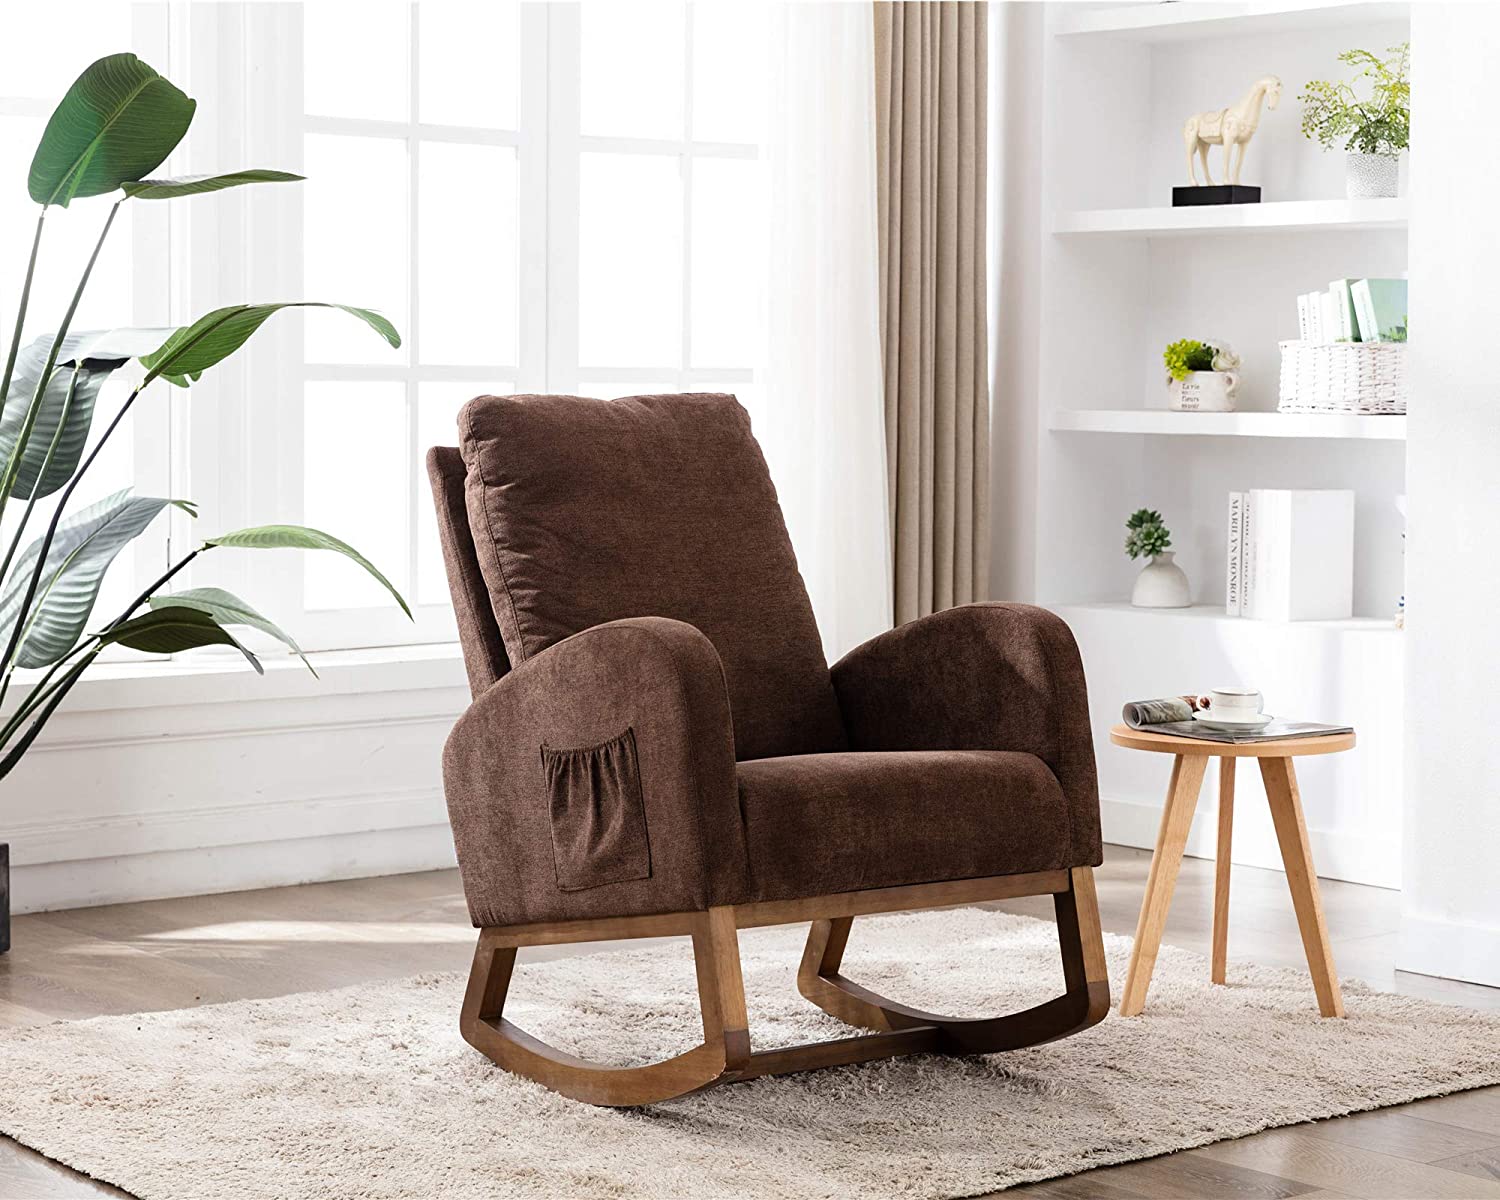 Rocking Chair Mid-Century Modern Nursery Rocking Armchair Upholstered Tall Back Accent Glider Rocker for Living Room